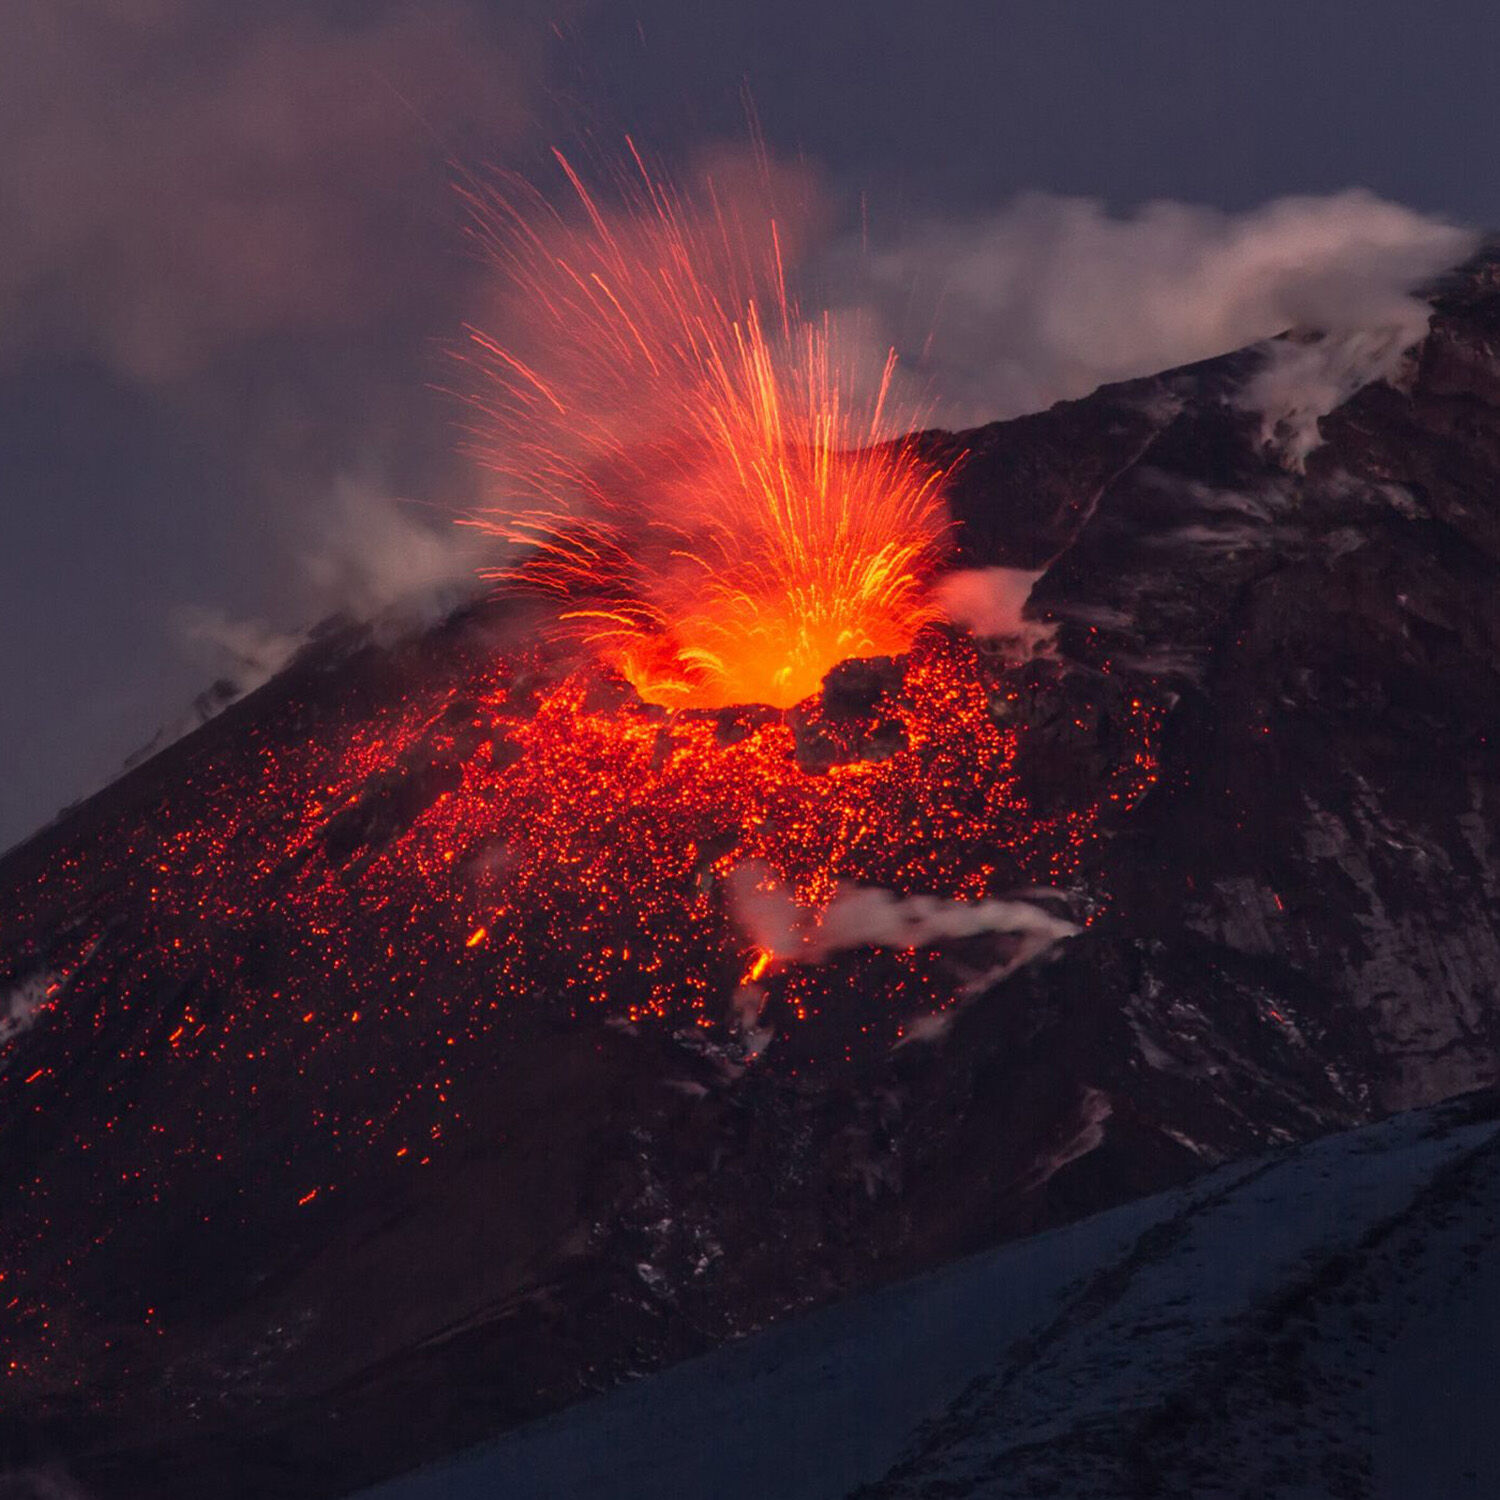 An erupting volcano - the miracle diamond creation